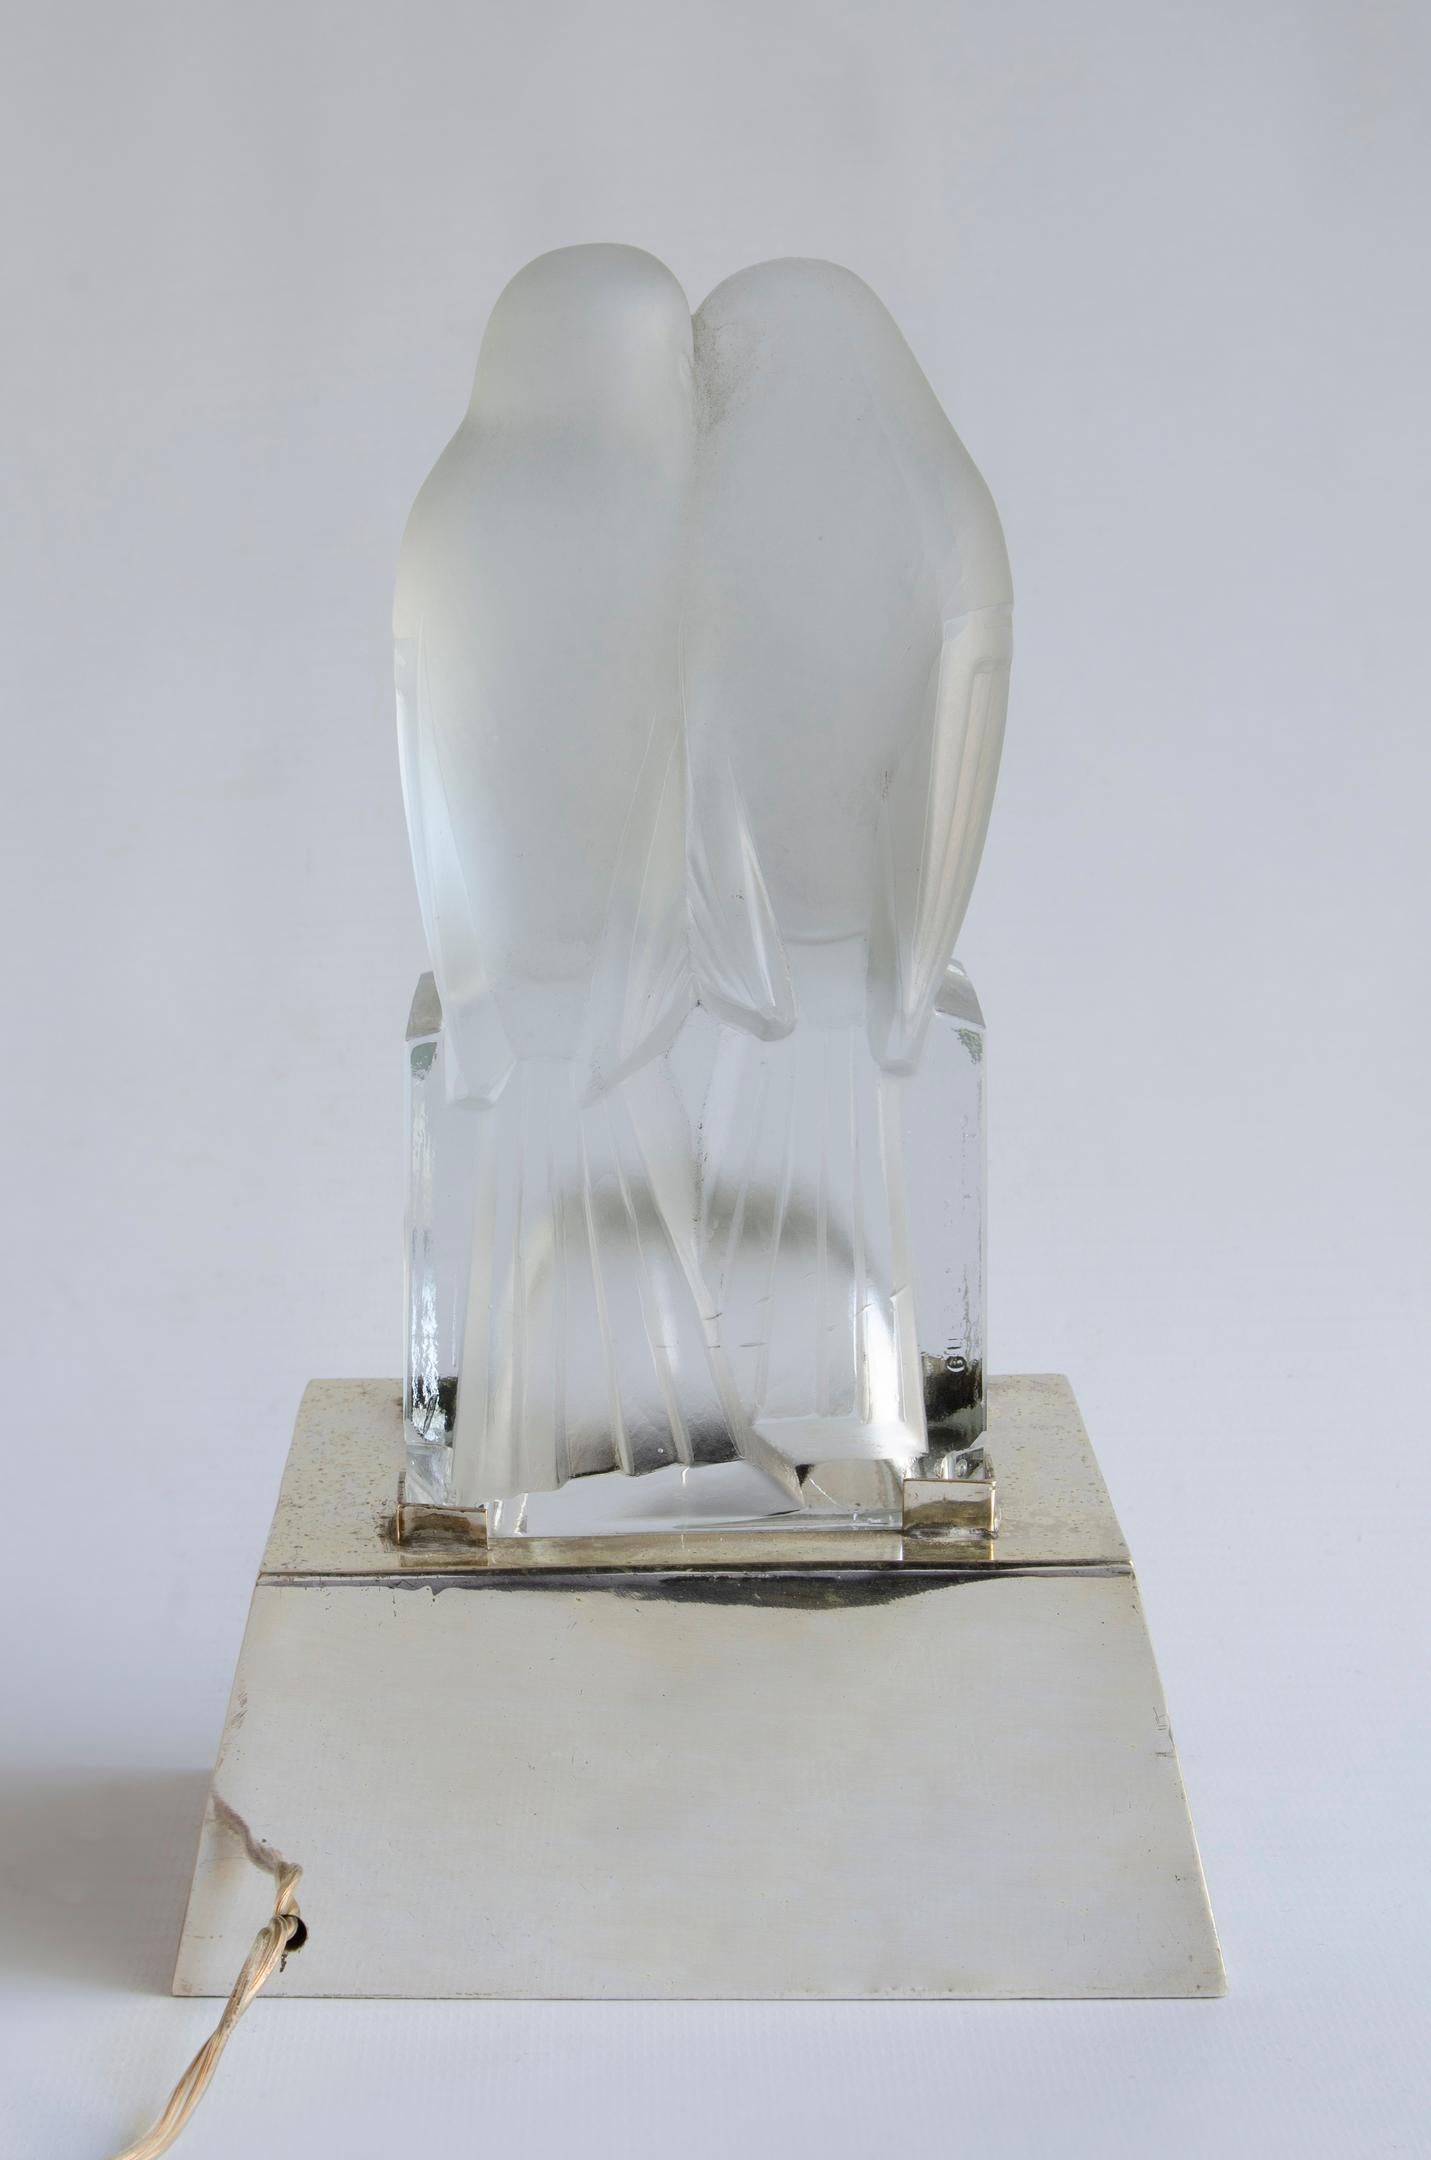 Art Deco lamp (a pair of birds)
Artist David Gueron (Degue)
frosted glass
electrified 220 w
(on the polished back)
Origin France
circa 1930.